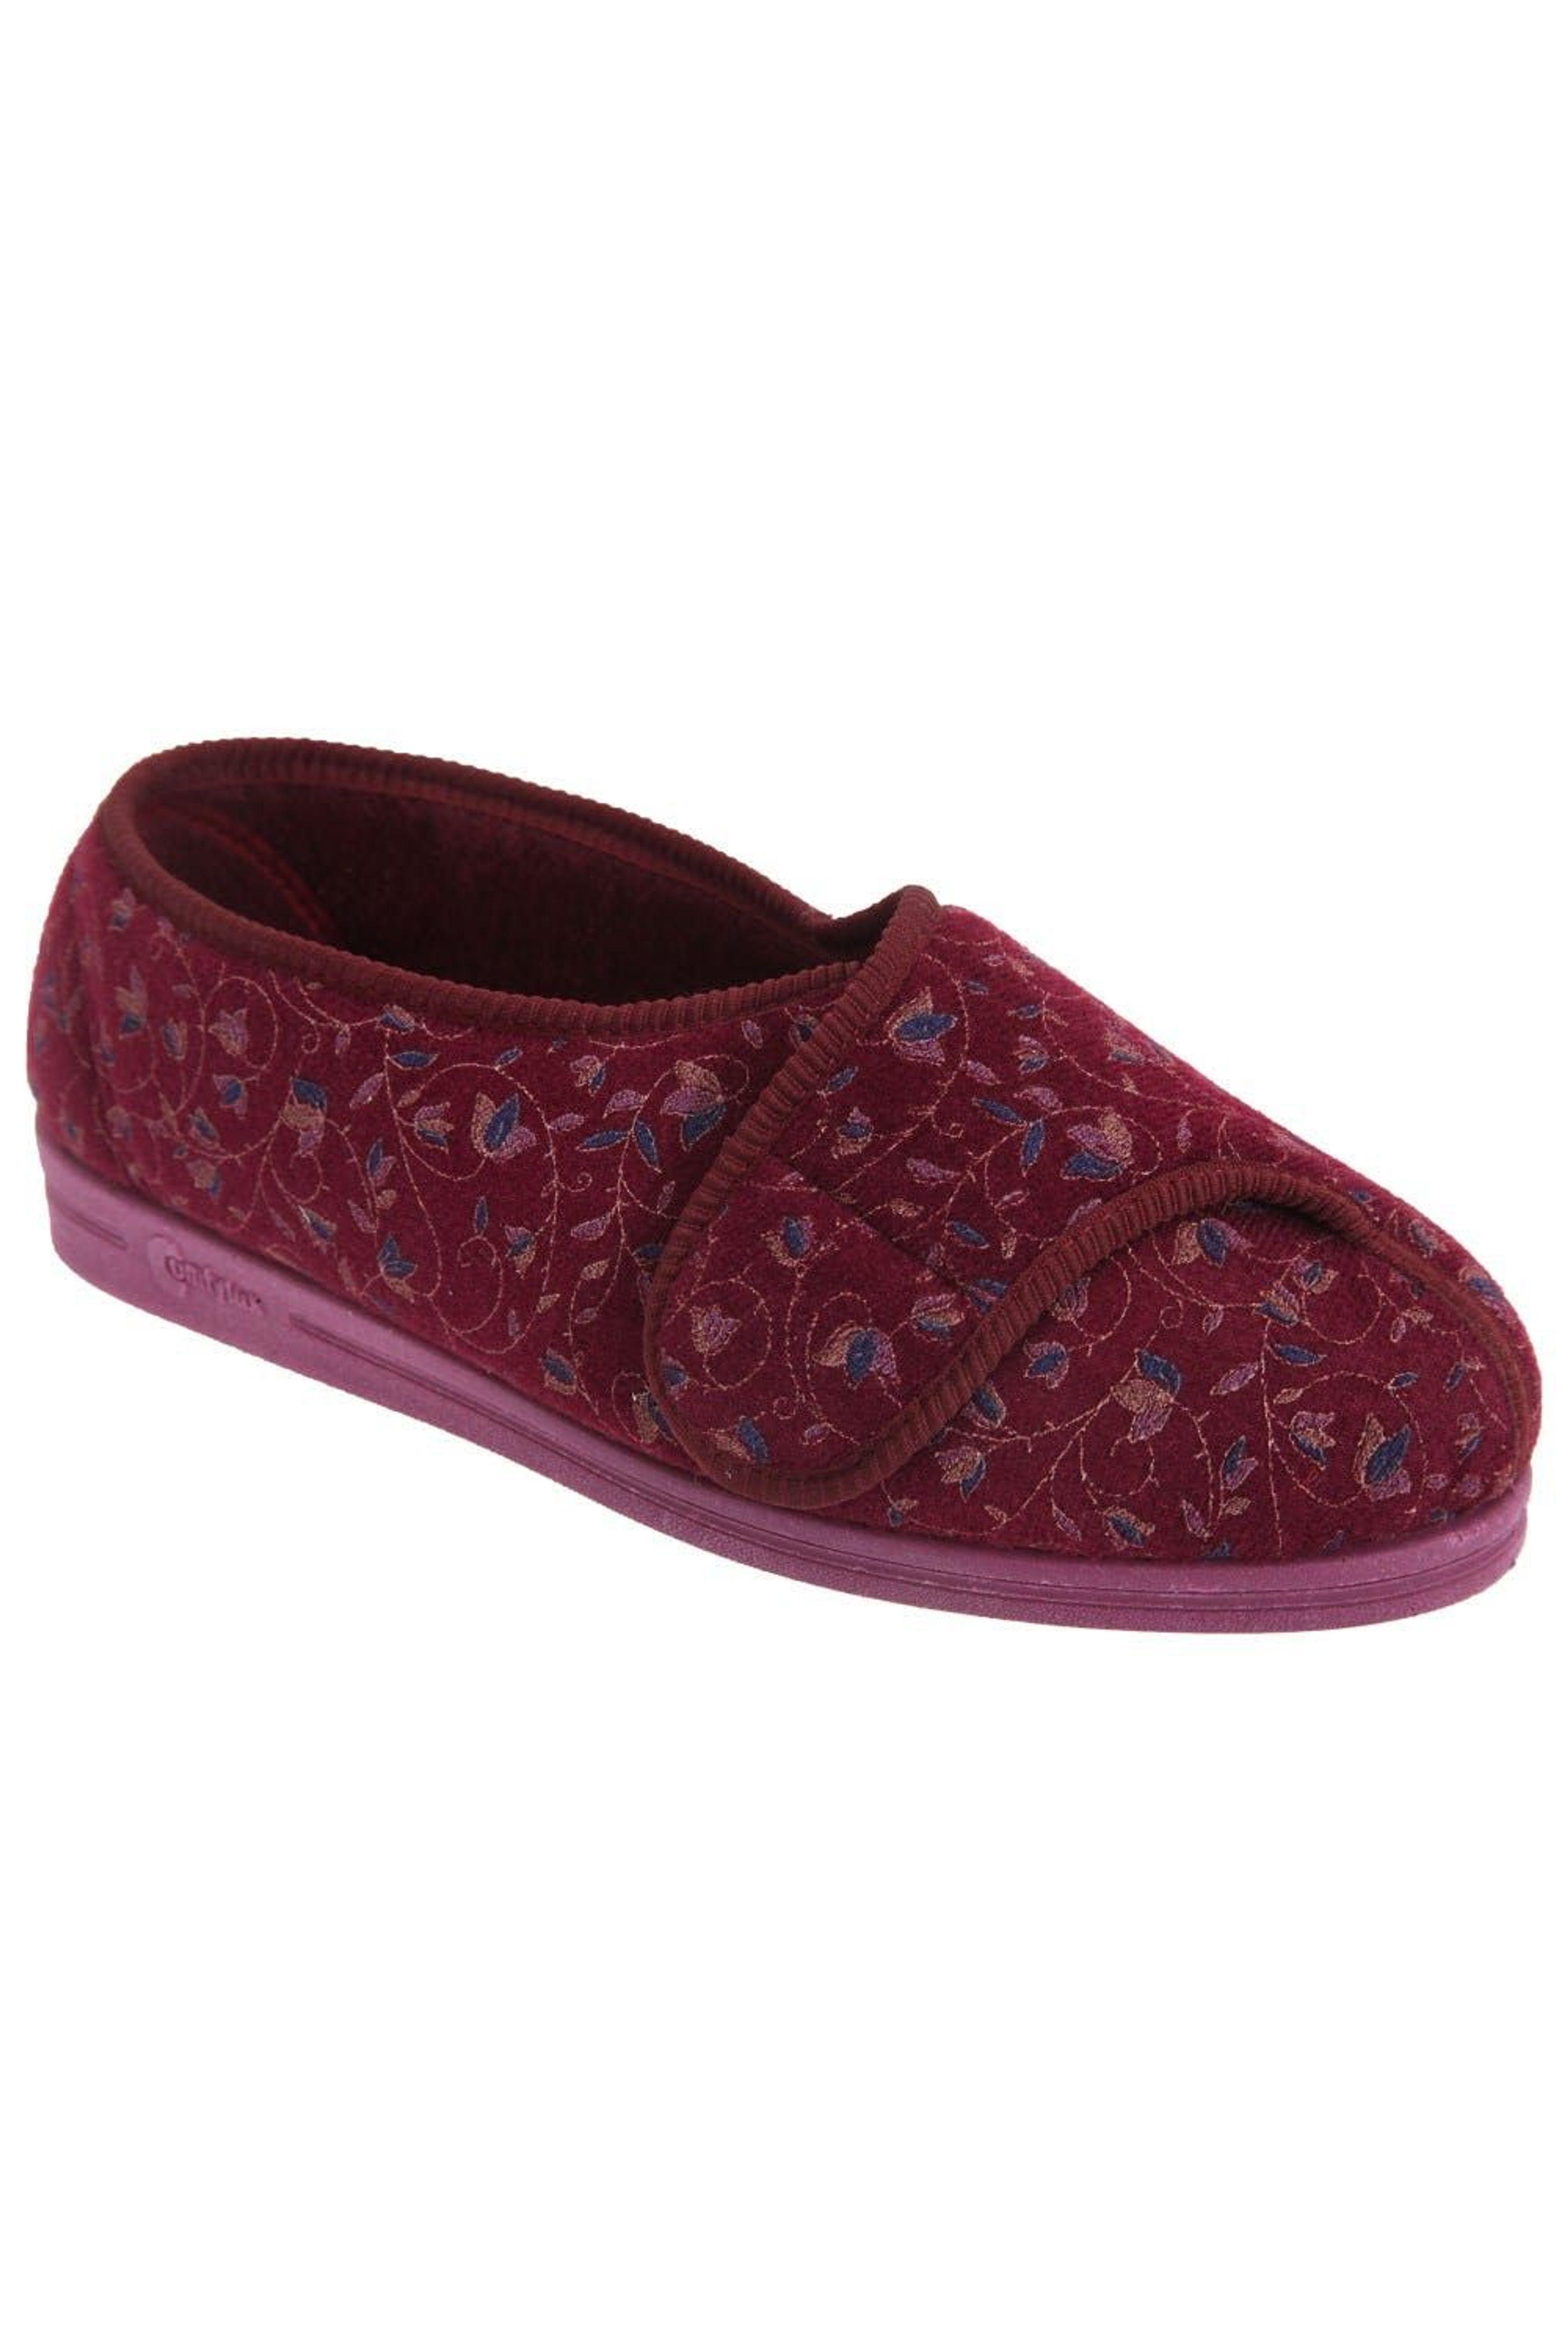 Comfylux Helen Floral Superwide Slippers in Red | Lyst